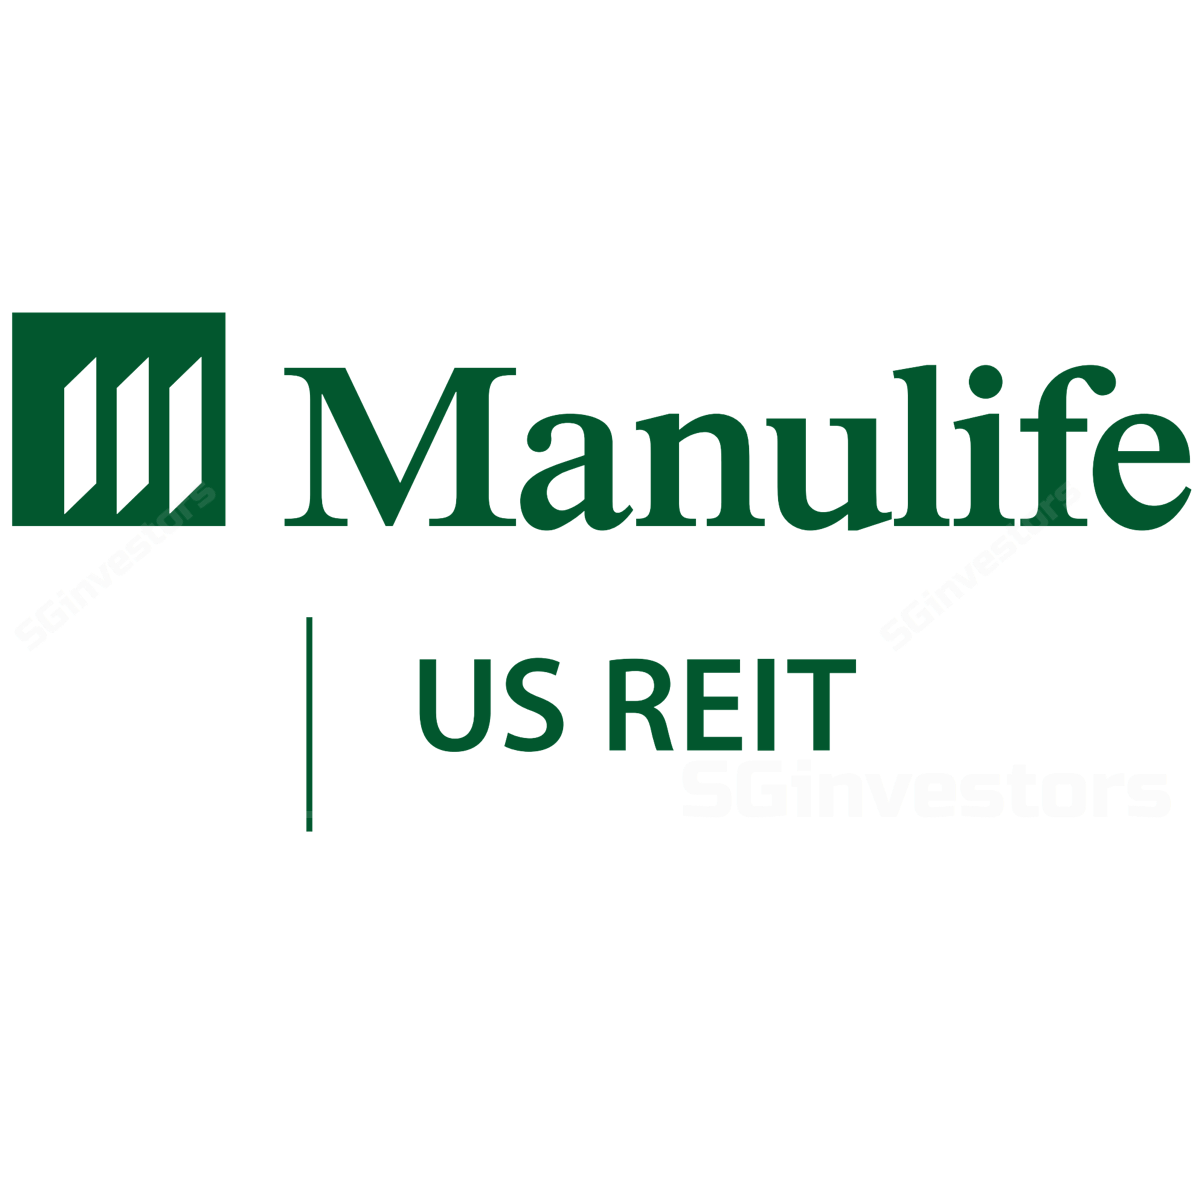 Manulife US REIT - UOB Kay Hian 2018-05-02: 1q18 Results Of Must In Line